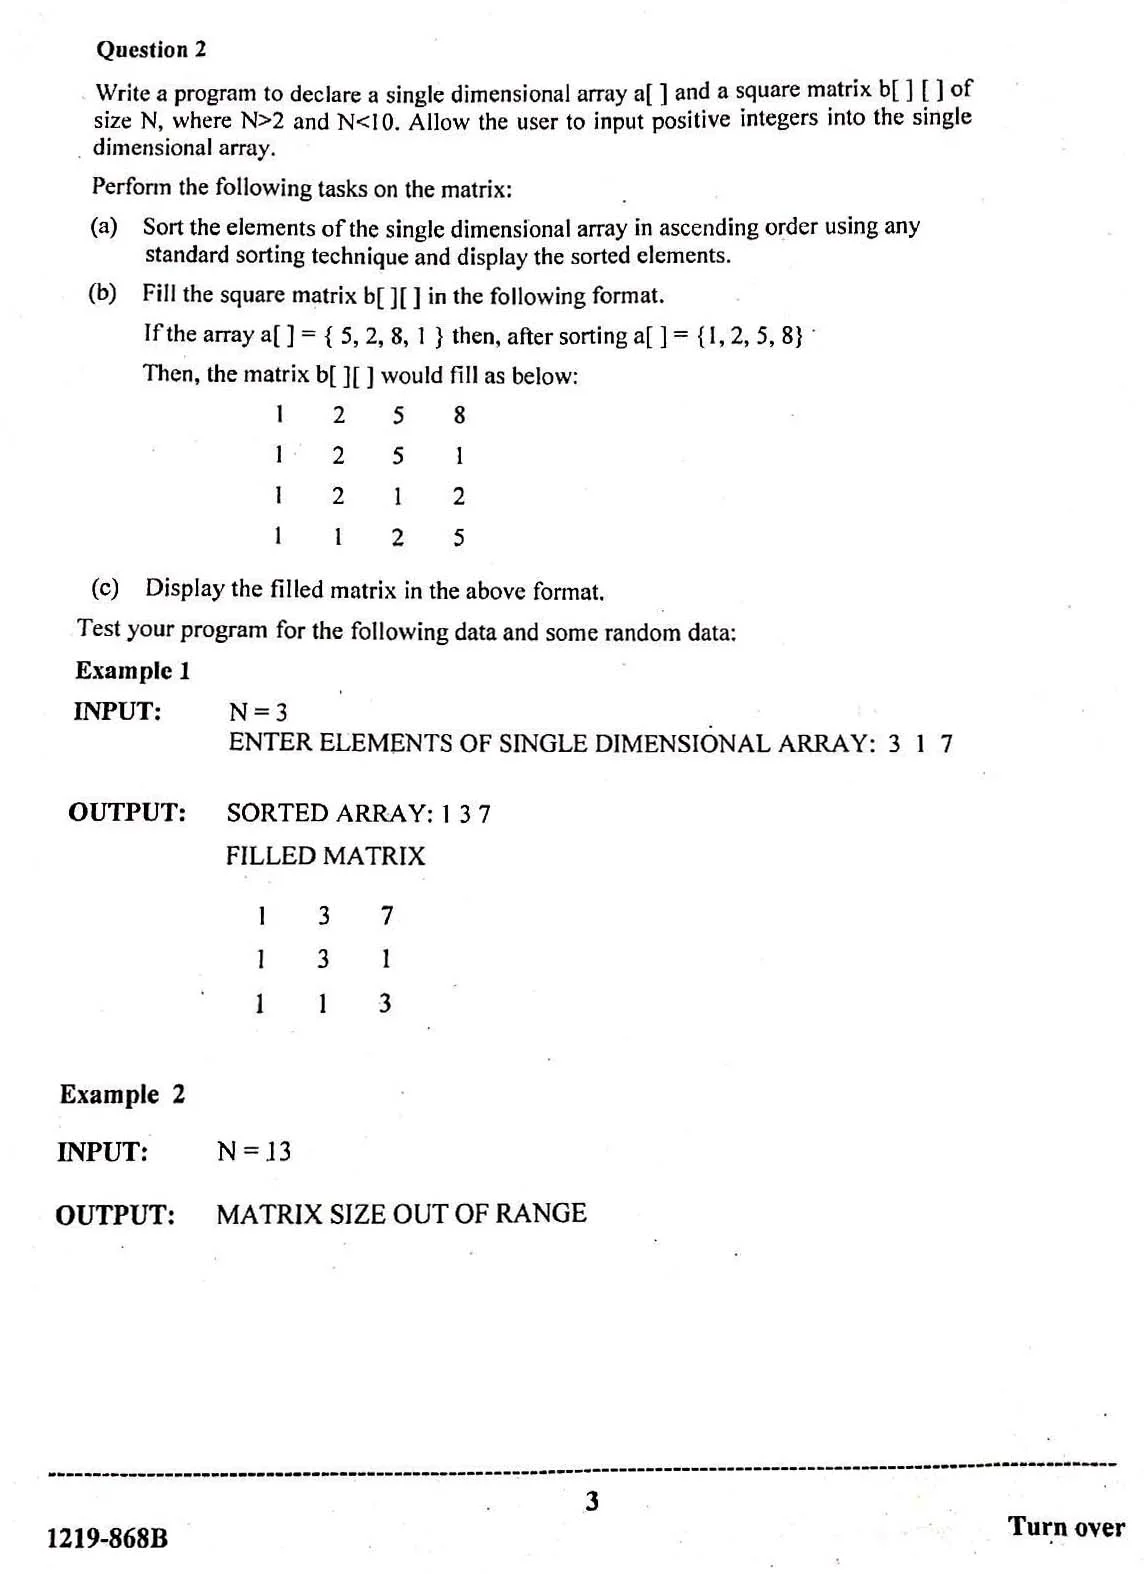 ISC Class 12 Computer Science Practical 2019 Question Paper